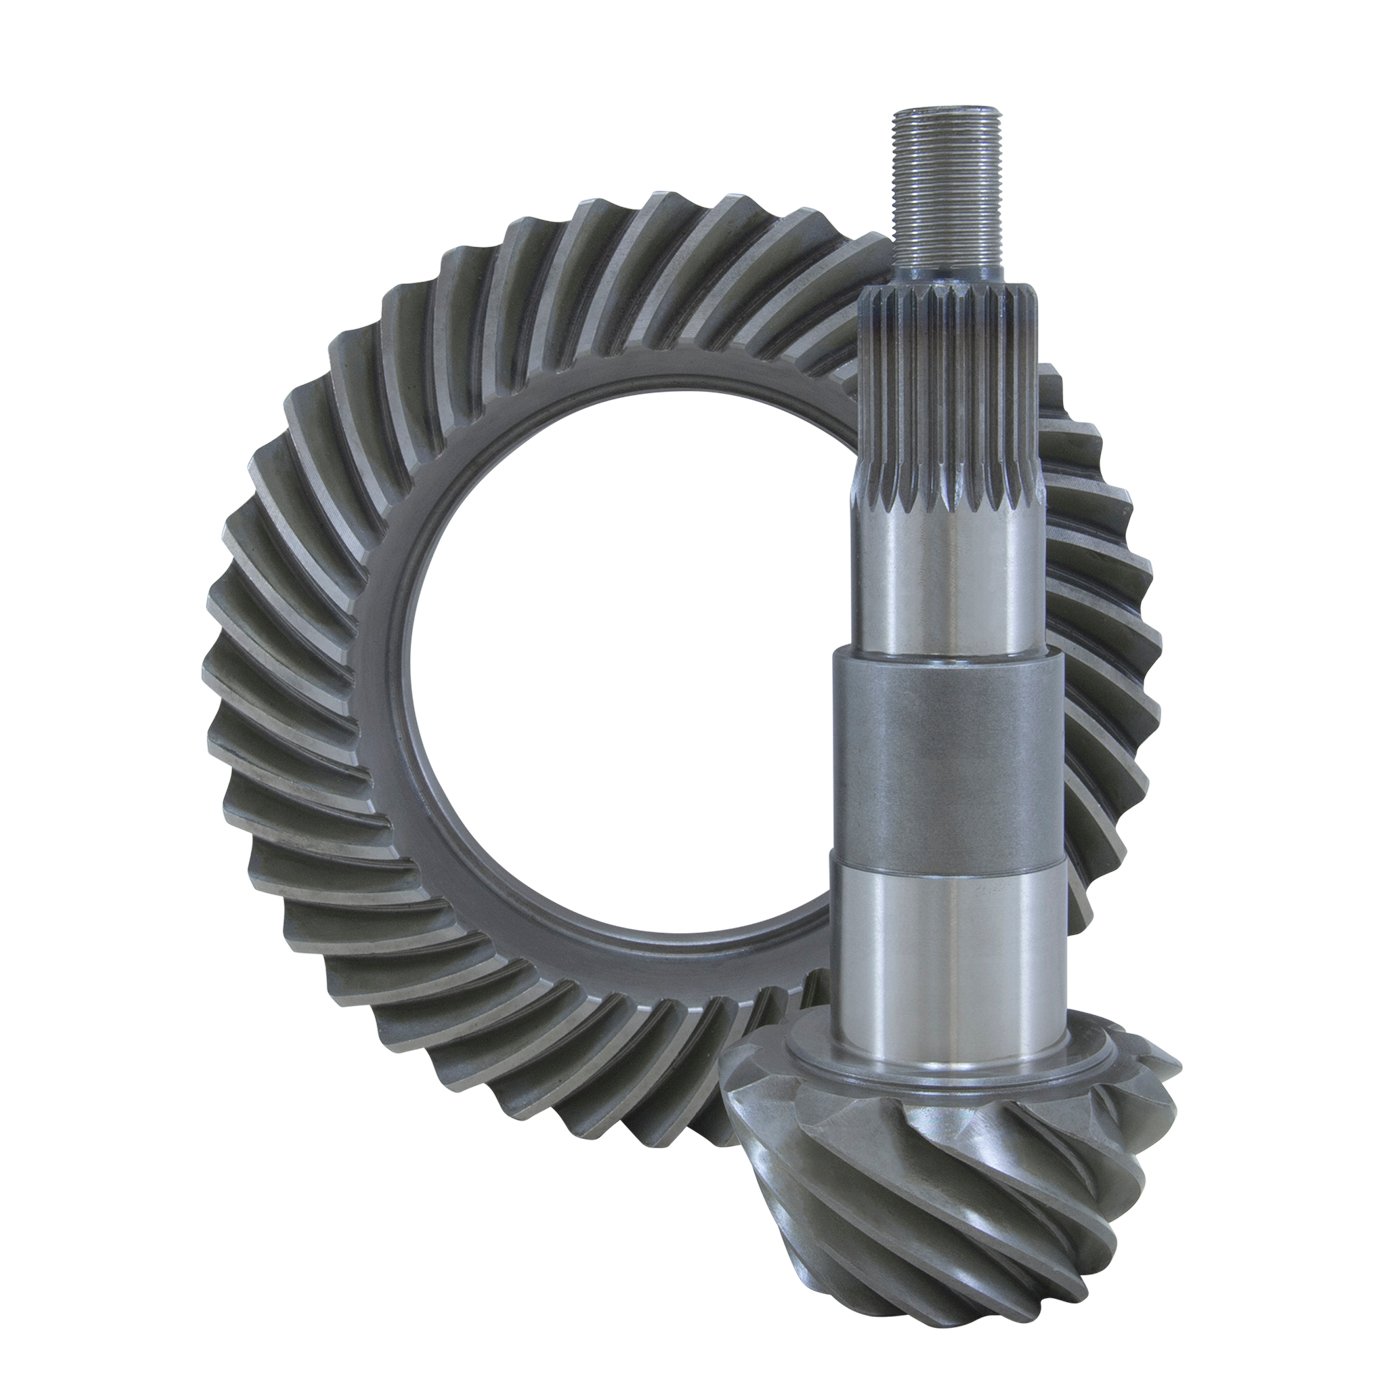 USA Standard ZG F7.5-373 Ring & Pinion Gear Set, For Ford 7.5 in., 3.73 Ratio.